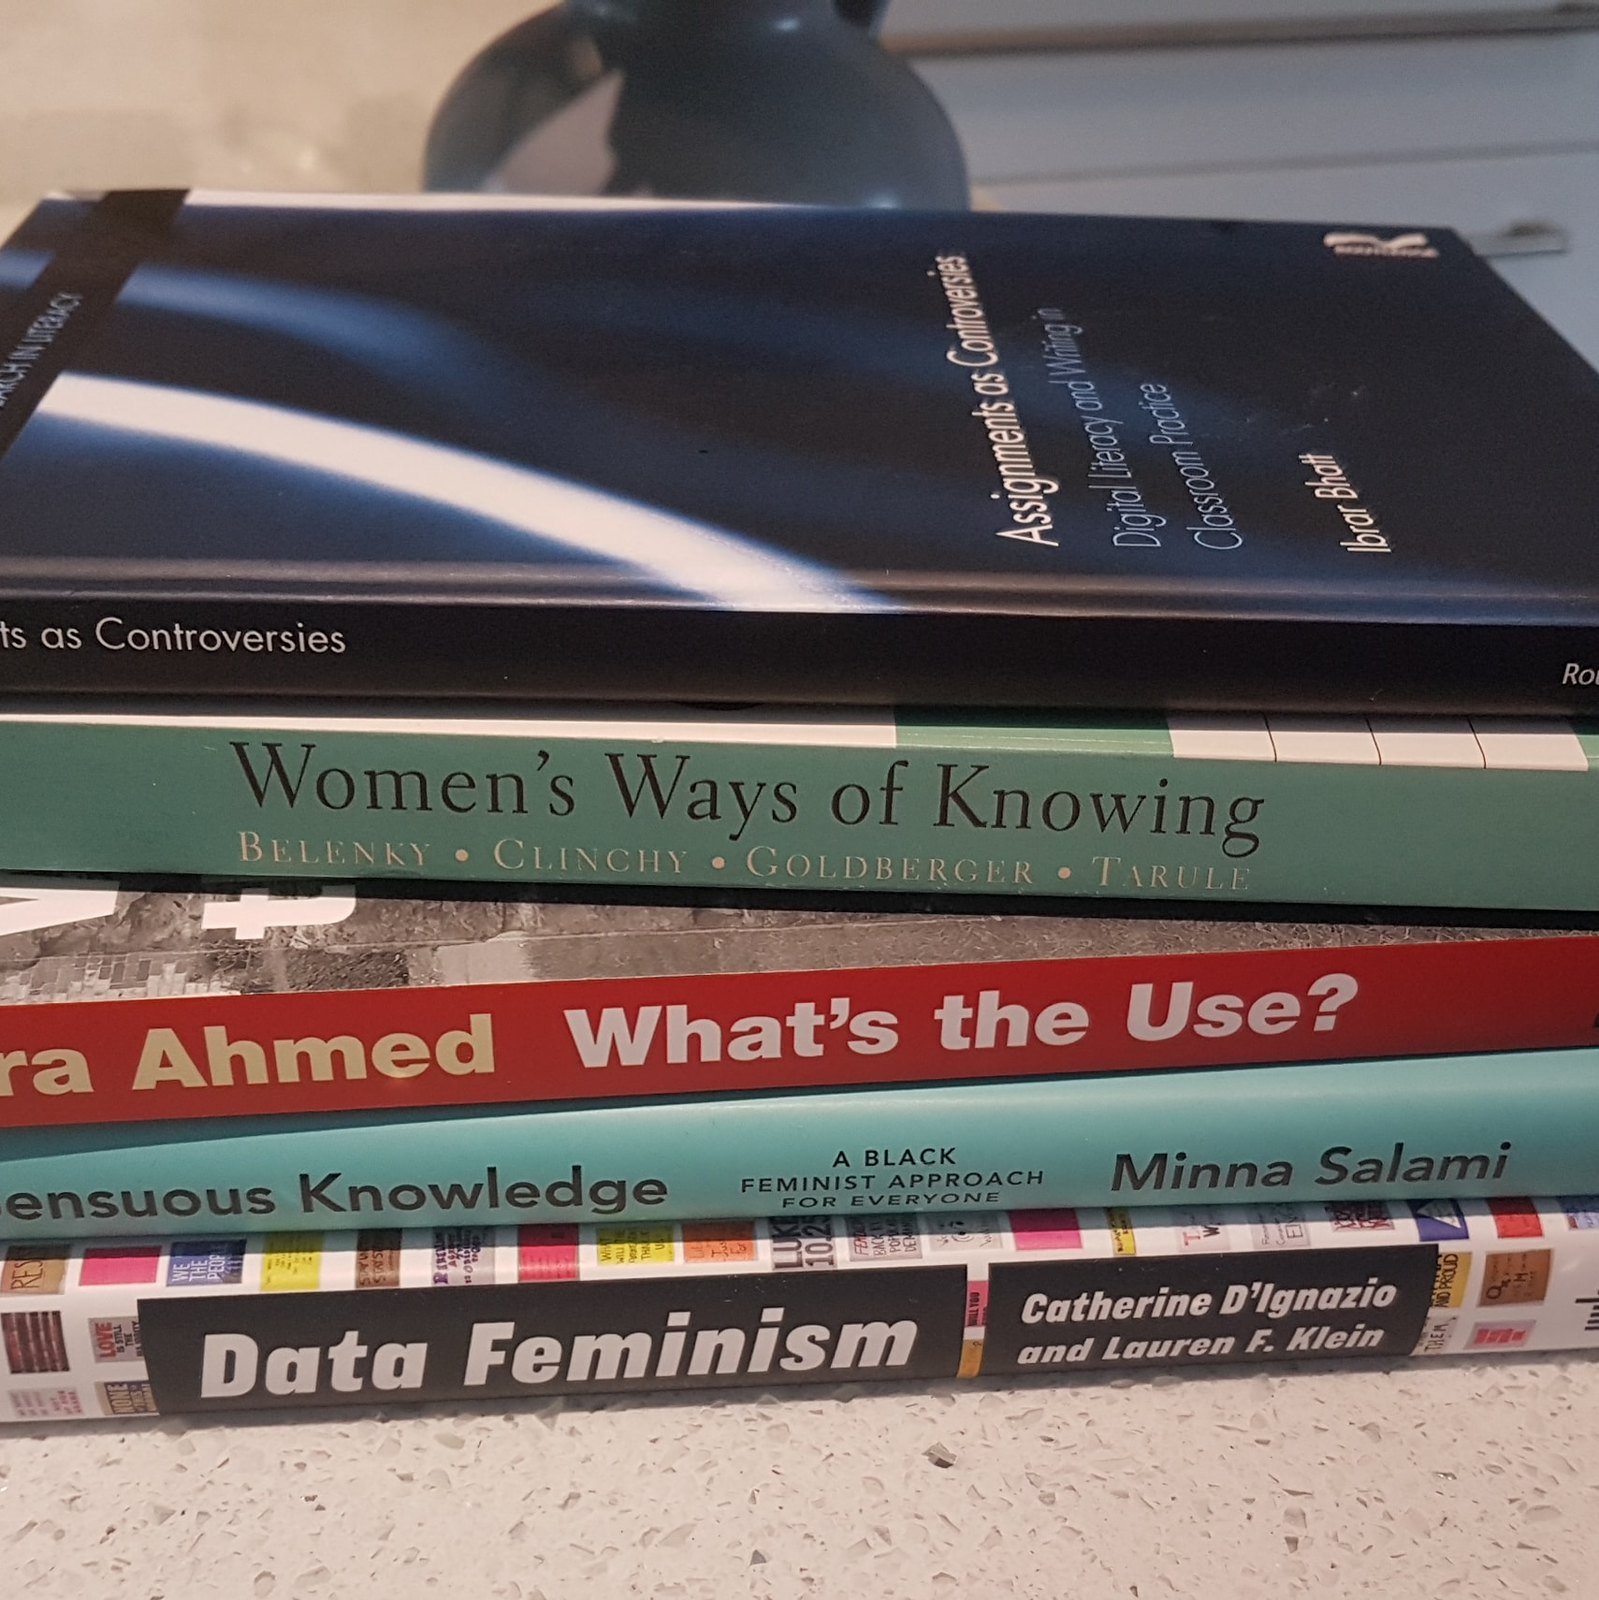 Feminist and other books